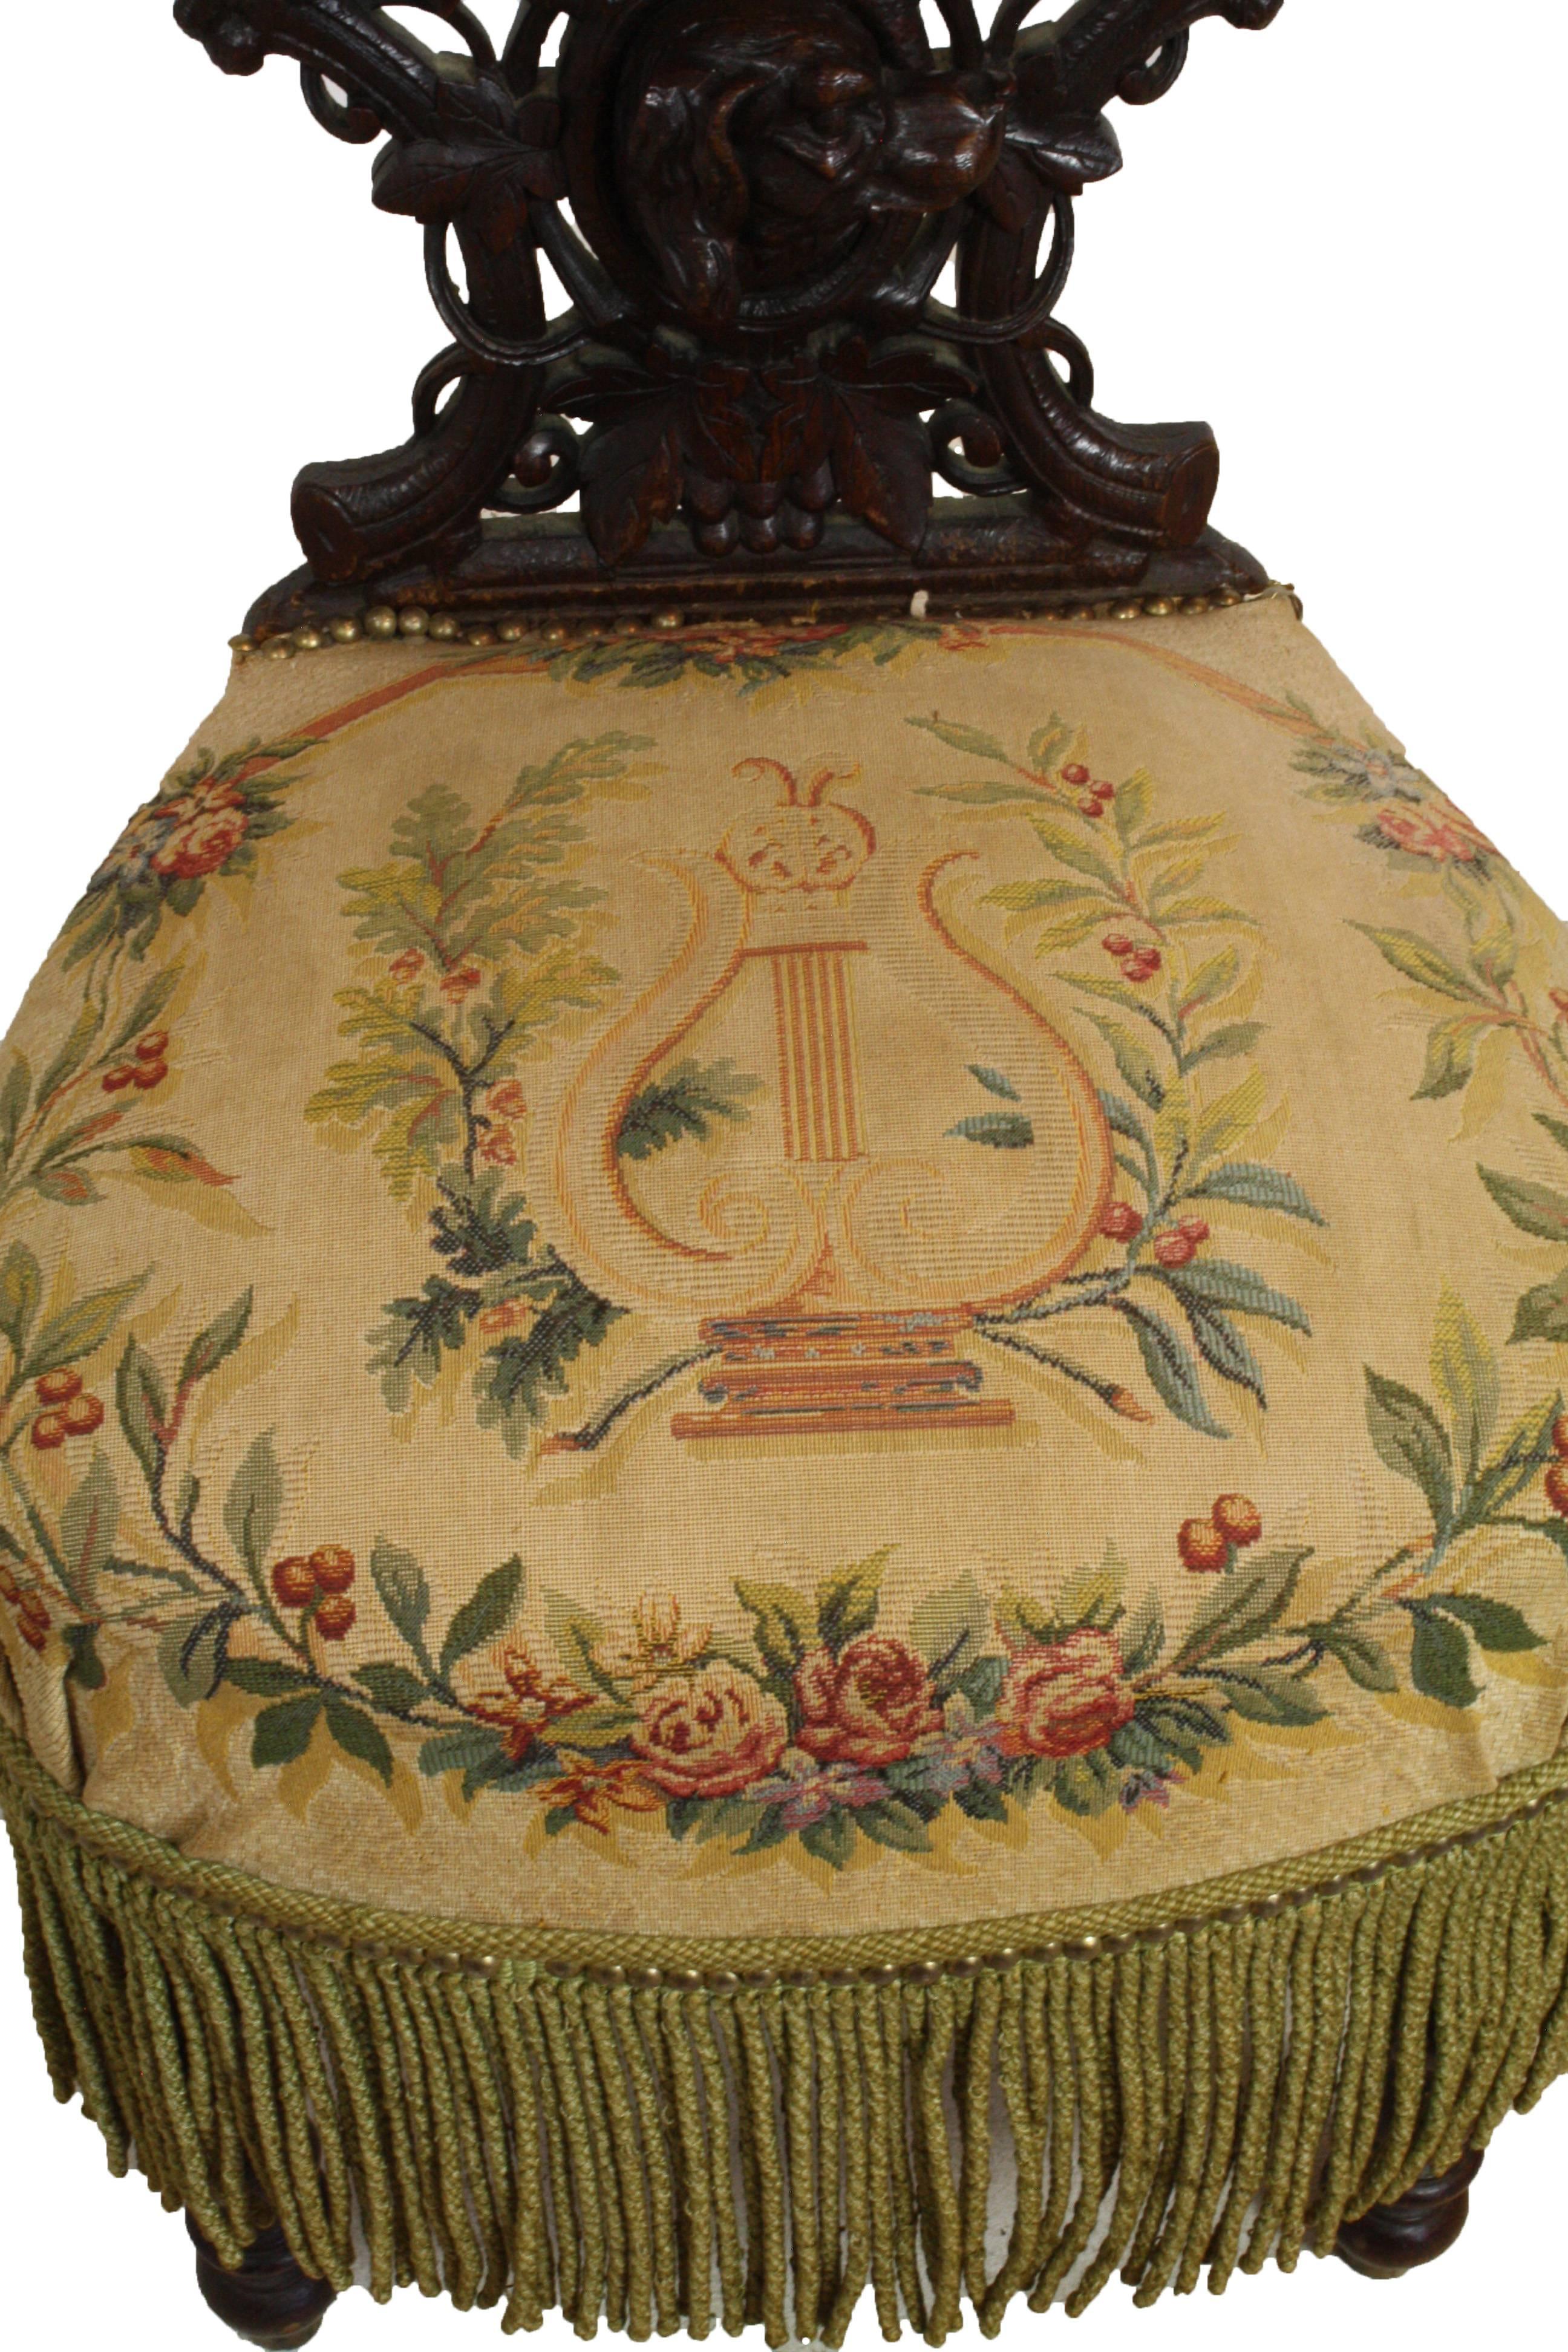 This French smoking chair features a storage area under the back armrest. The musical themed fabric with surrounding tassels gives this intricately carved chair a Haute Boheme (High Bohemian) feel.